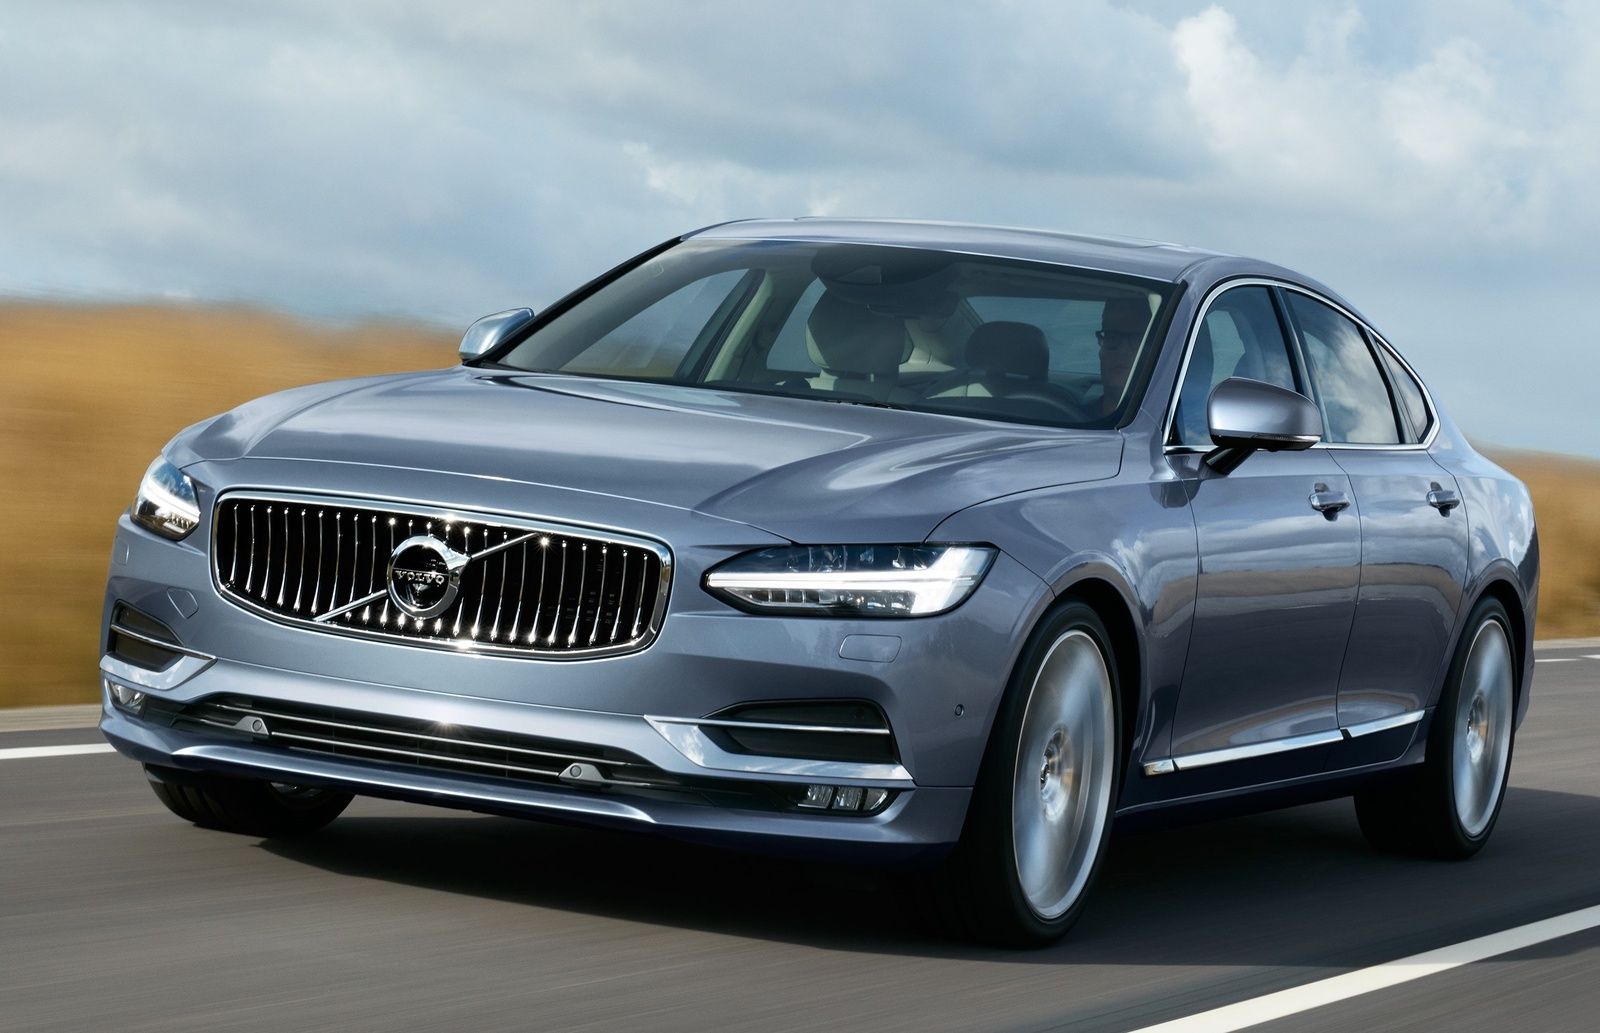 Silver 2017 pale blue volvo s90 on the road